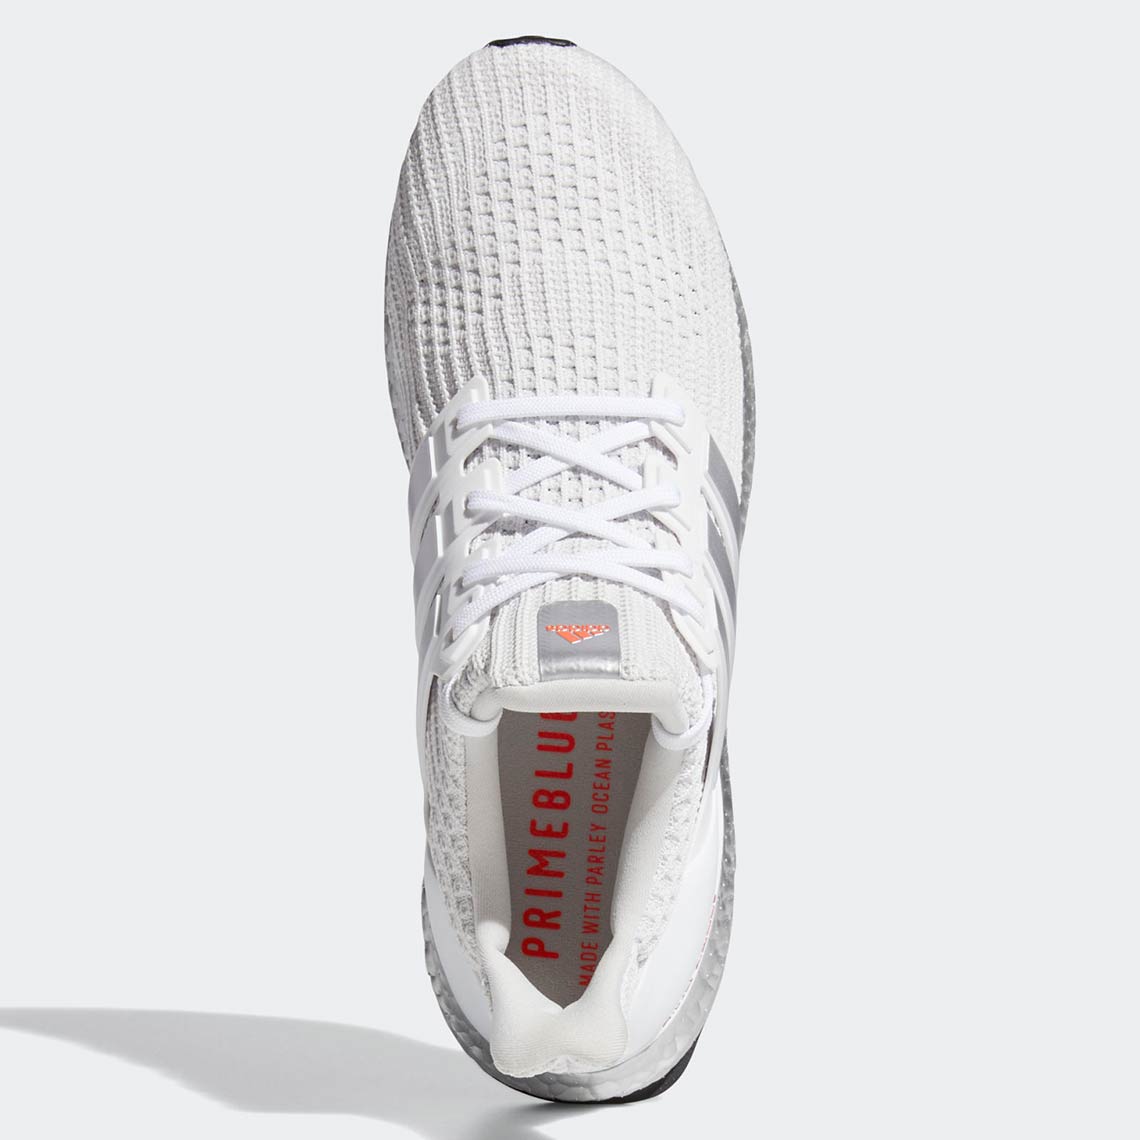 Adidas Ultra Boost 4.0 Dna White G55461 1